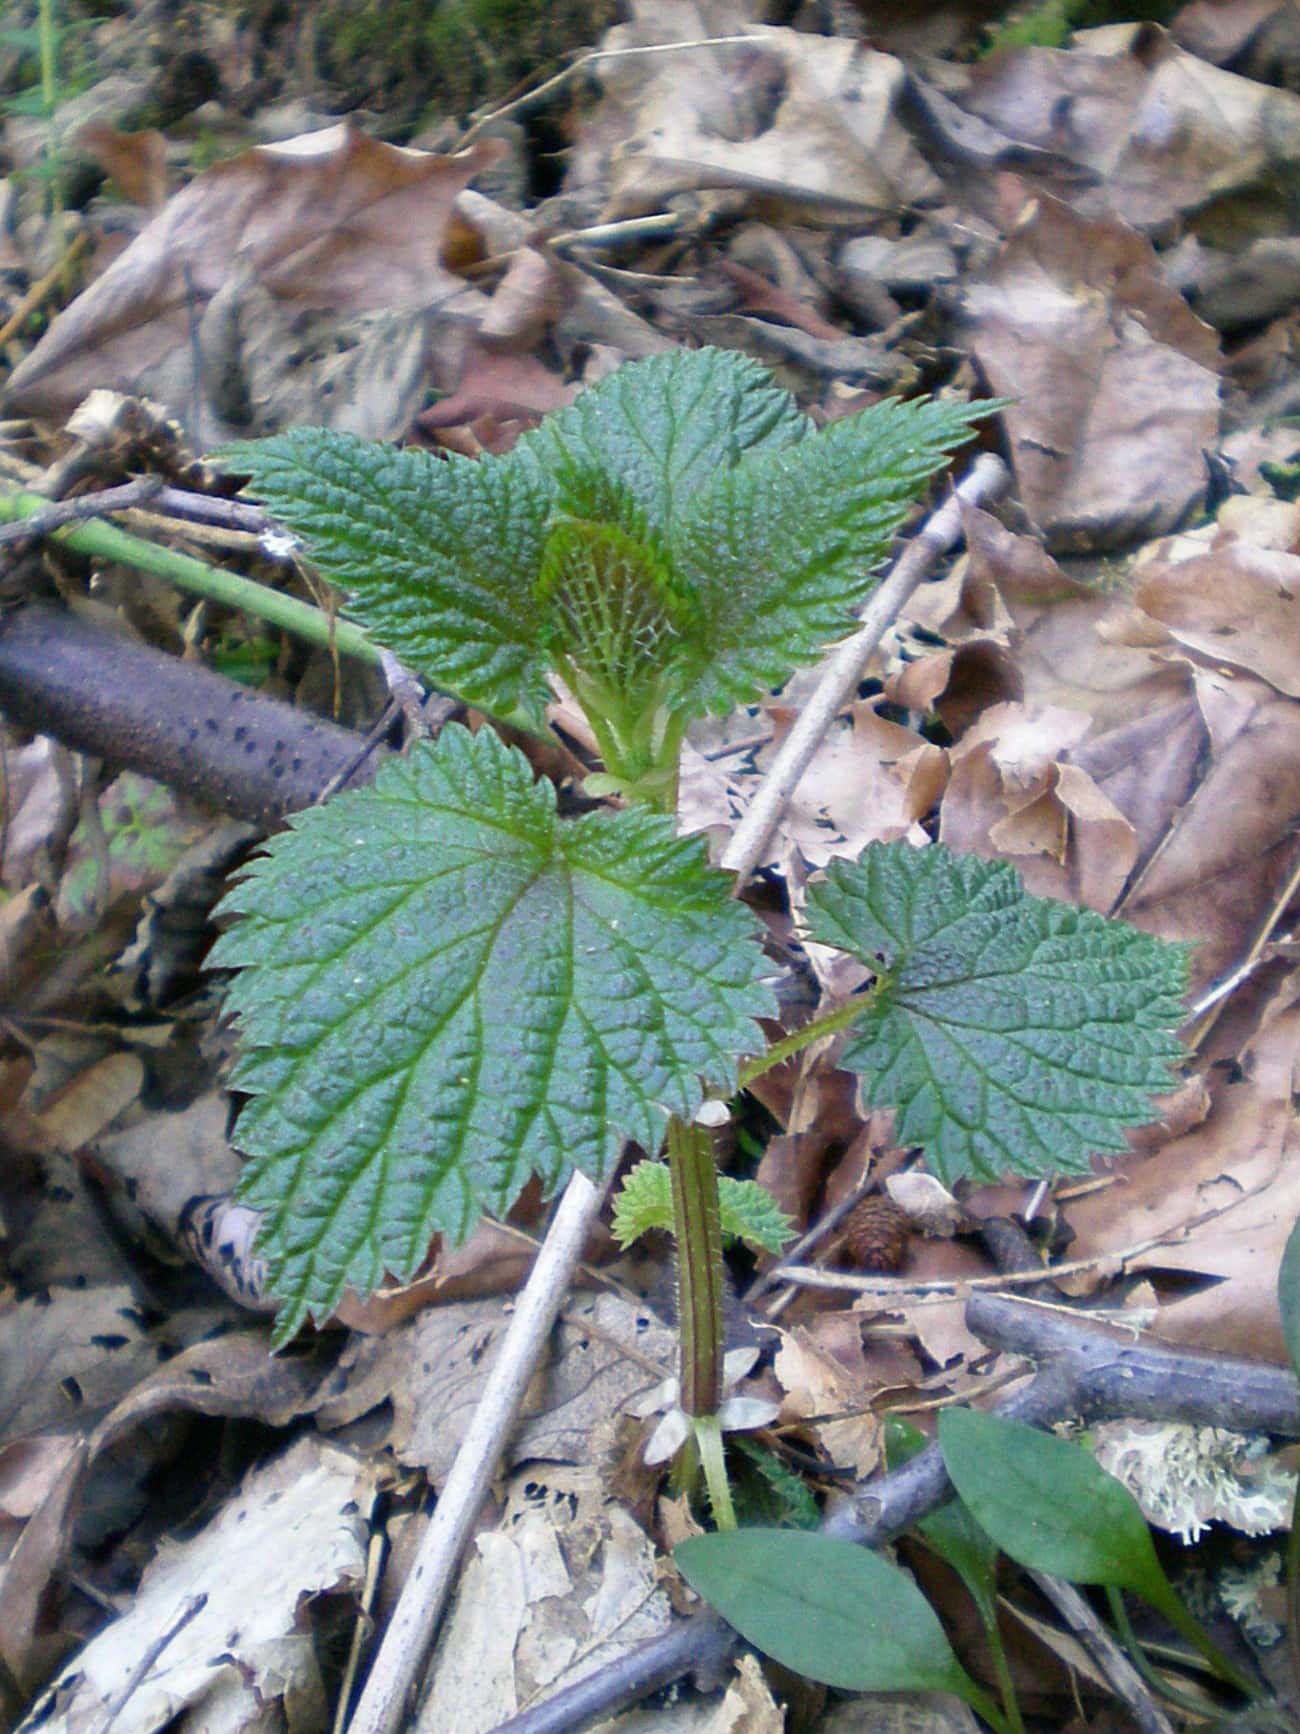 Most Stinging Nettles Eaten in One Minute